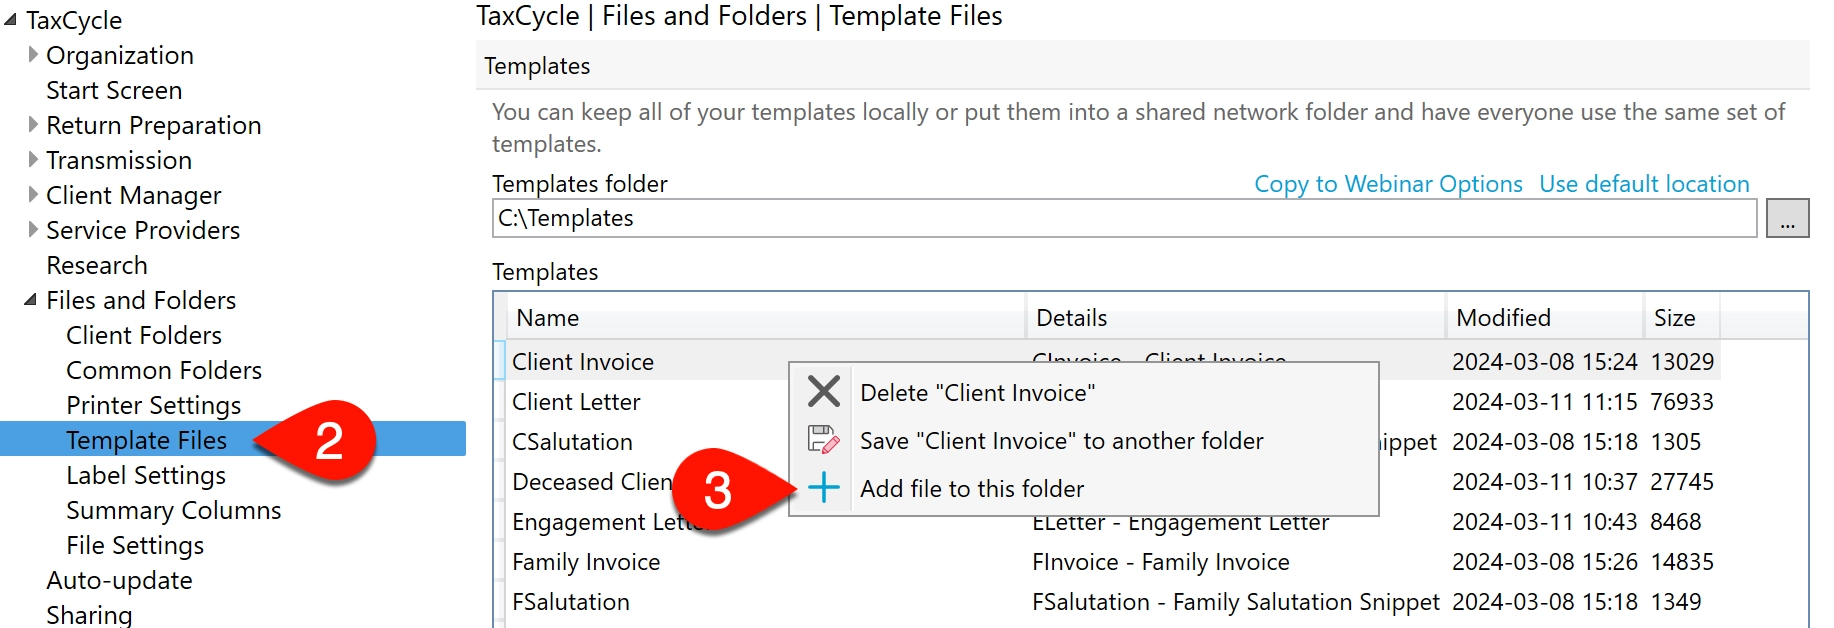 Screen Capture: Add file to this folder